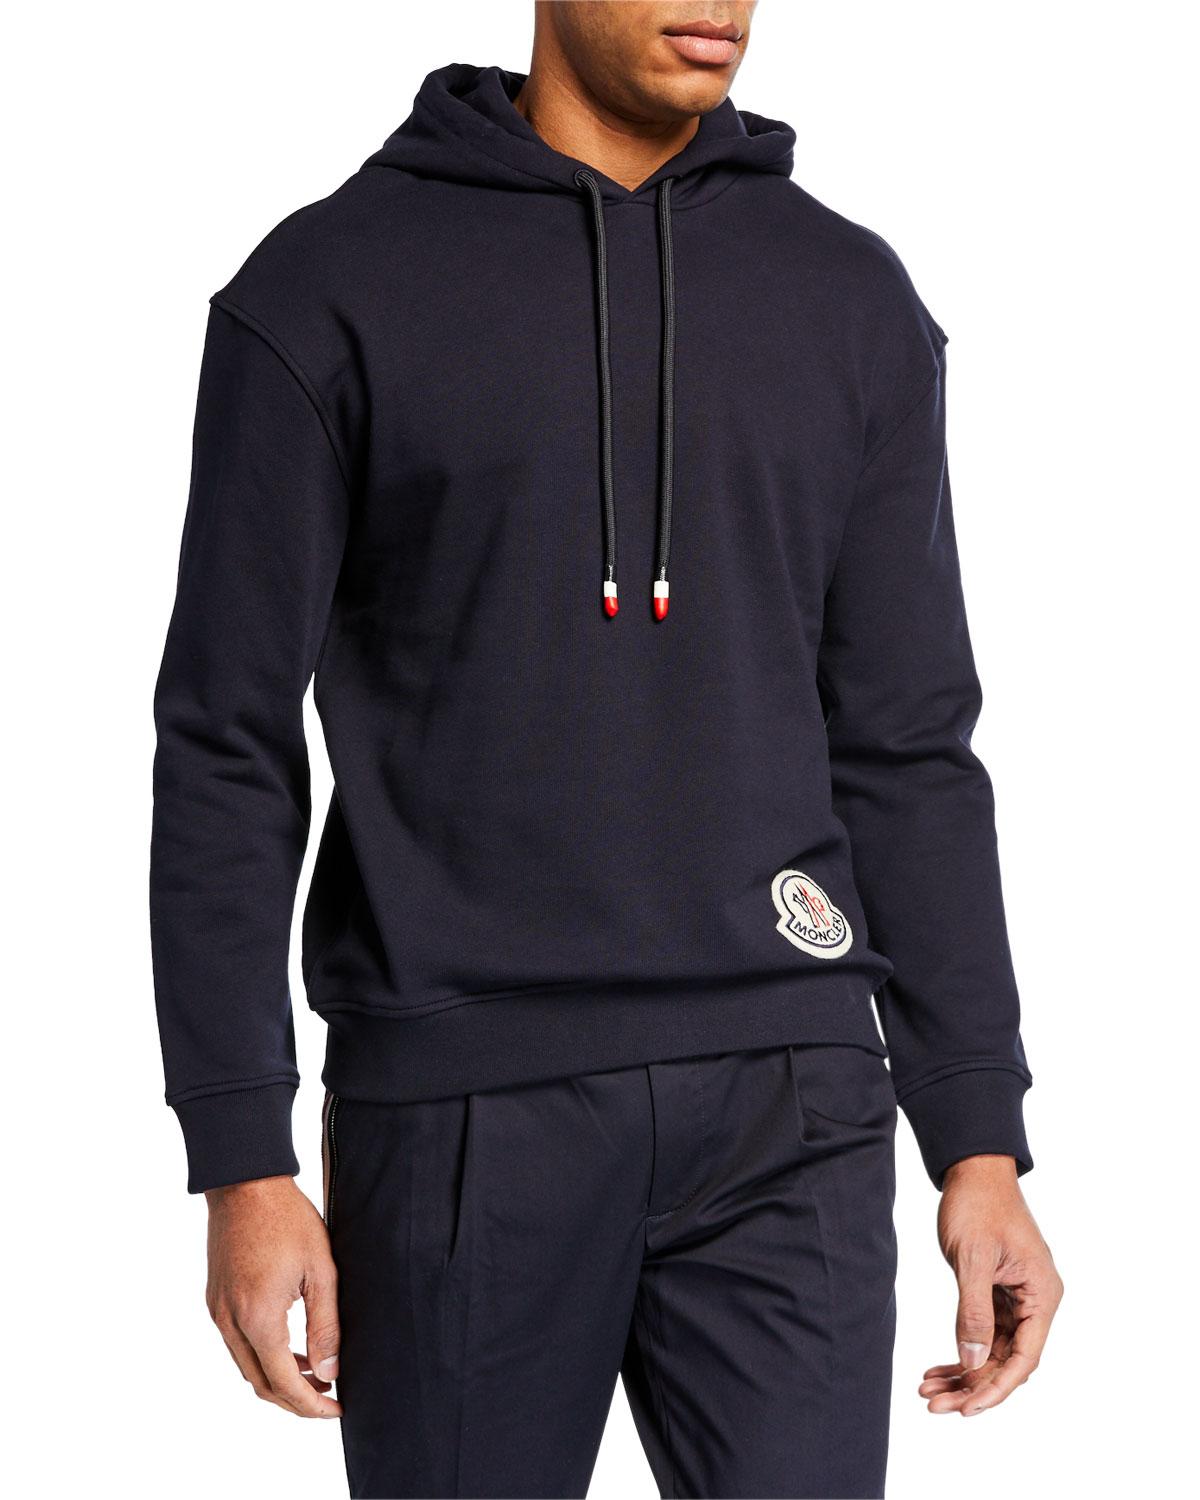 moncler genius hoodie Cheaper Than Retail Price> Buy Clothing, Accessories  and lifestyle products for women & men -